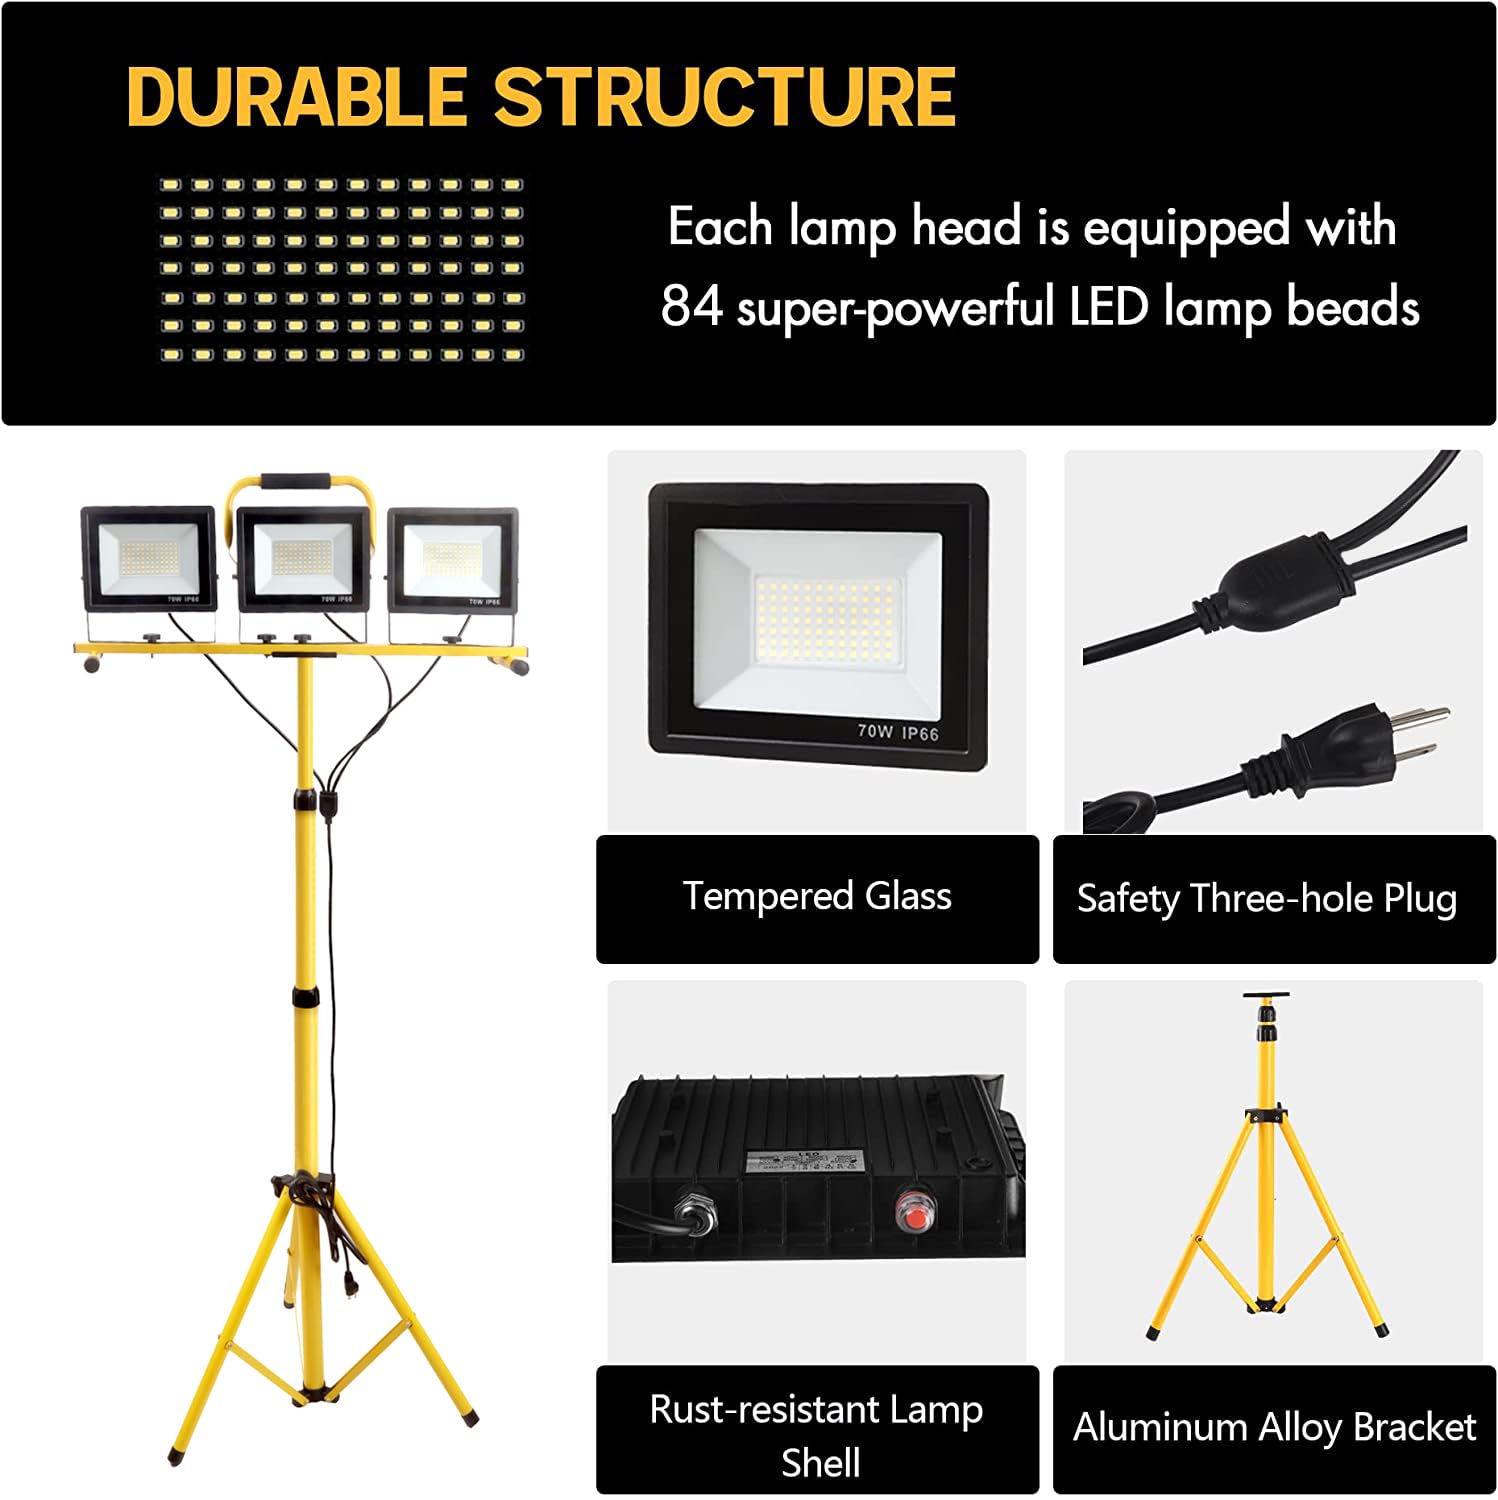 21000 Lumen Work Lights with Stand, 3 Adjustable Head LED Work Light, with Adjustable and Foldable Tripod Stand, Waterproof Lamp with Individual Switch with 6500 Kelvin Color Temperature